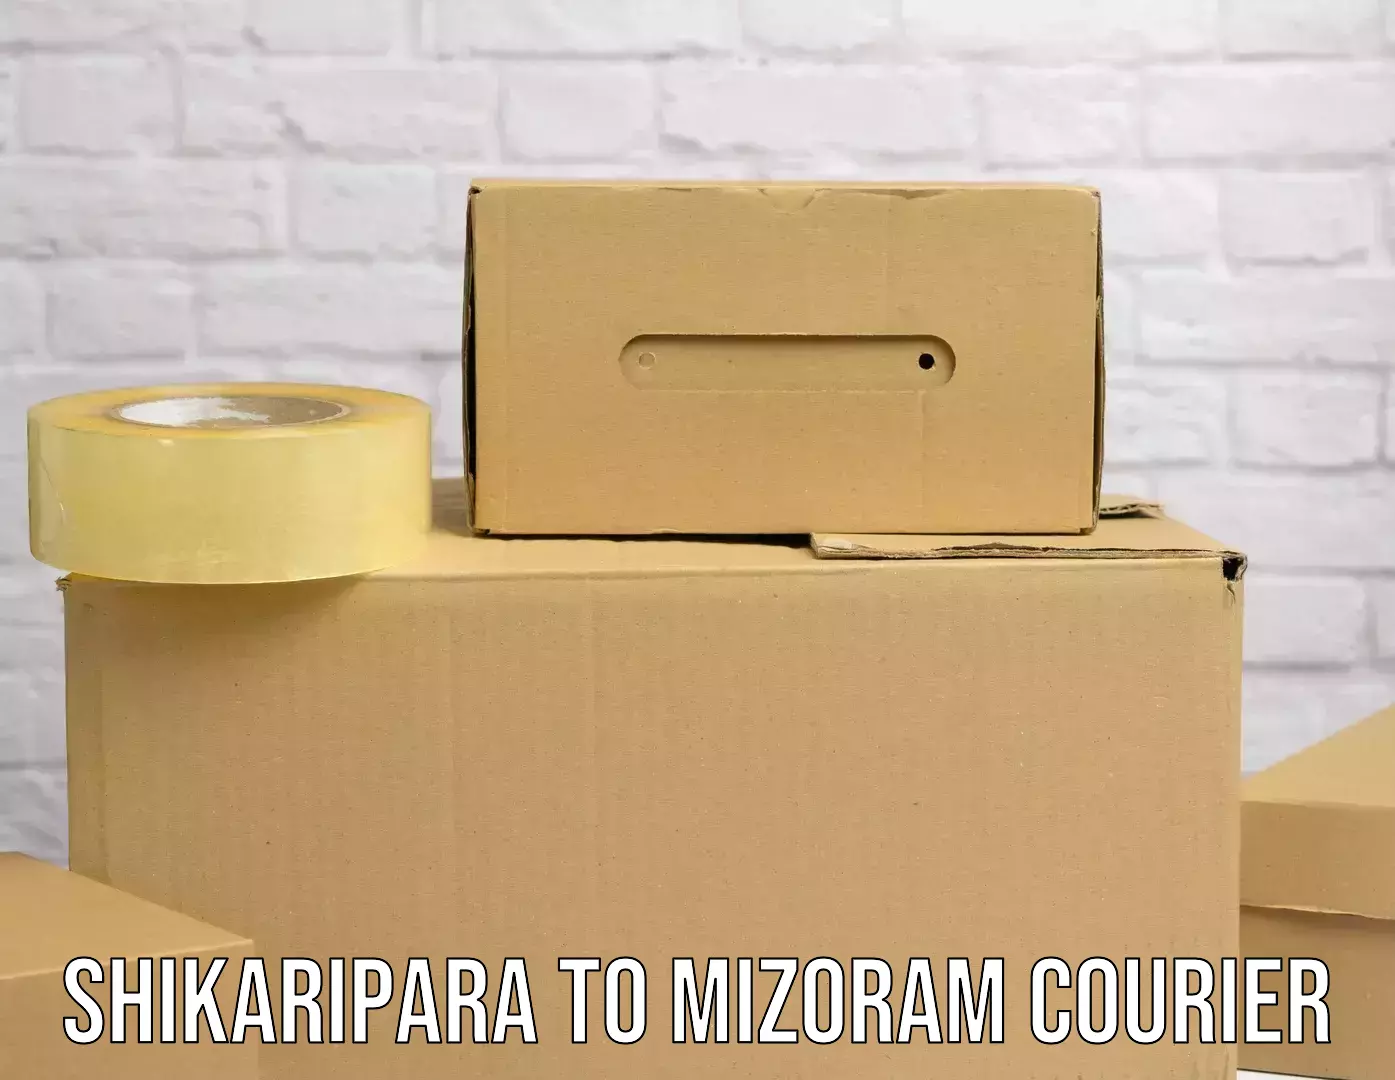 24-hour delivery options Shikaripara to Darlawn